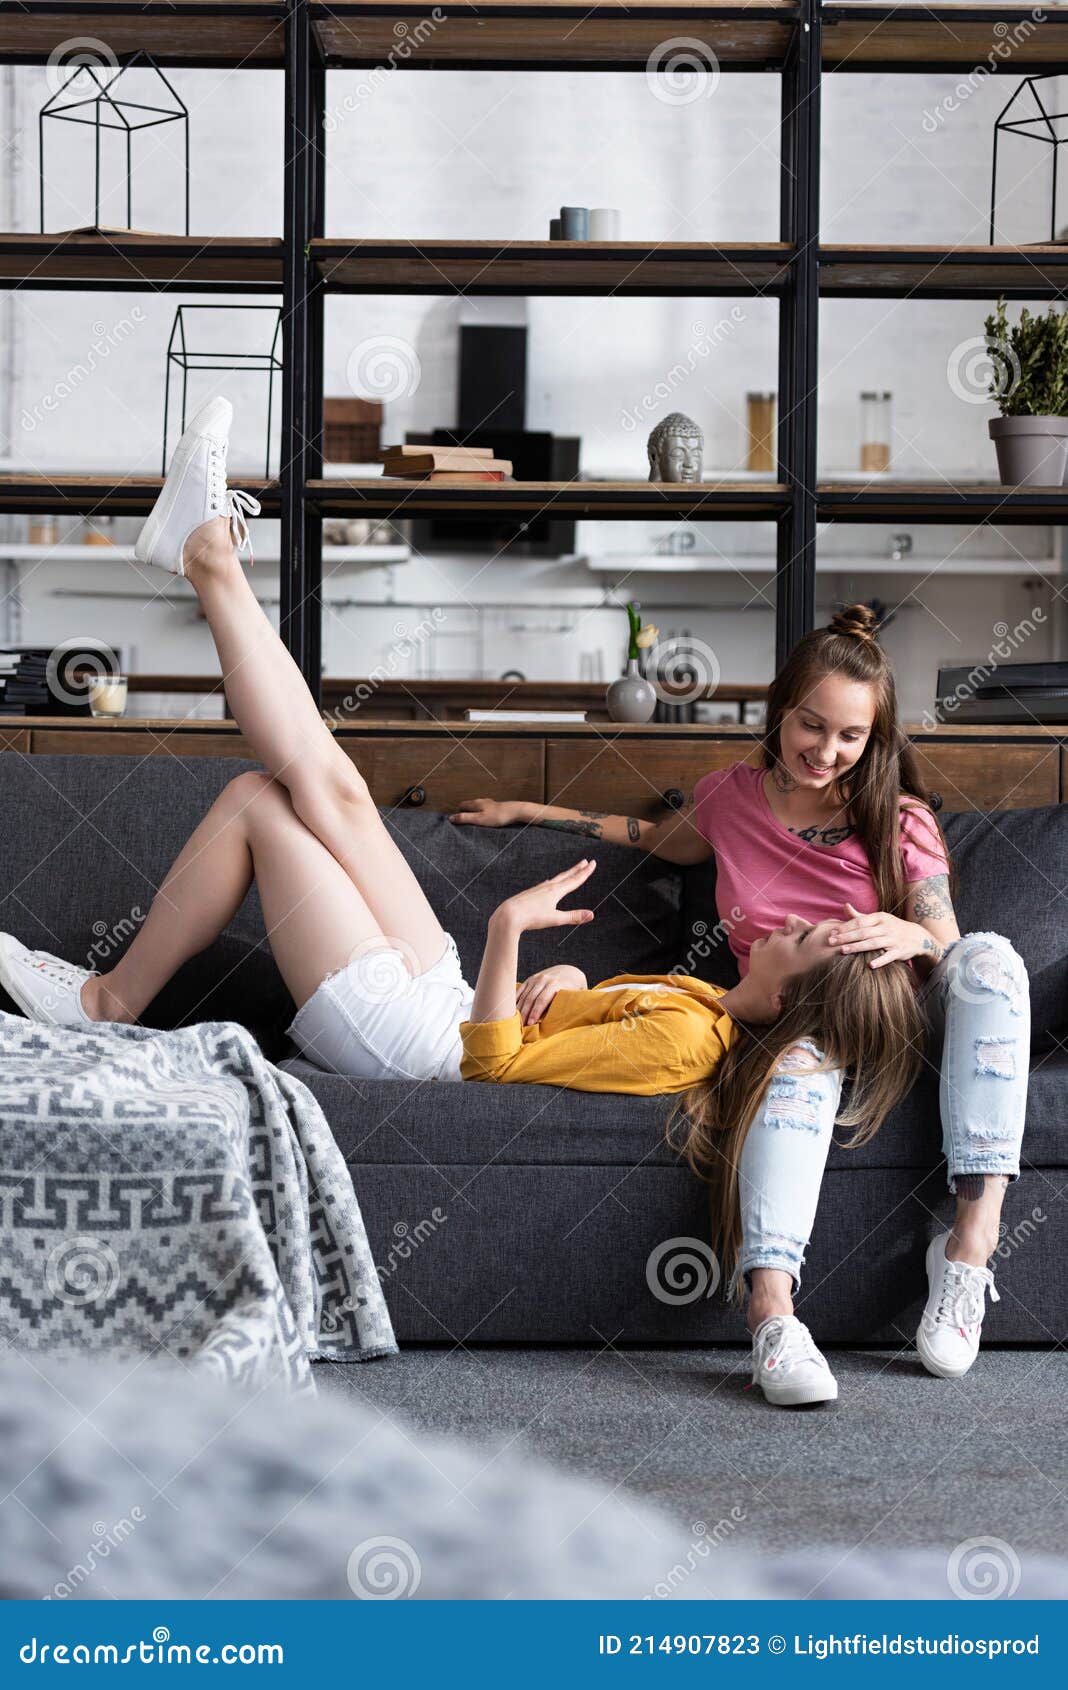 Lesbians on the couch